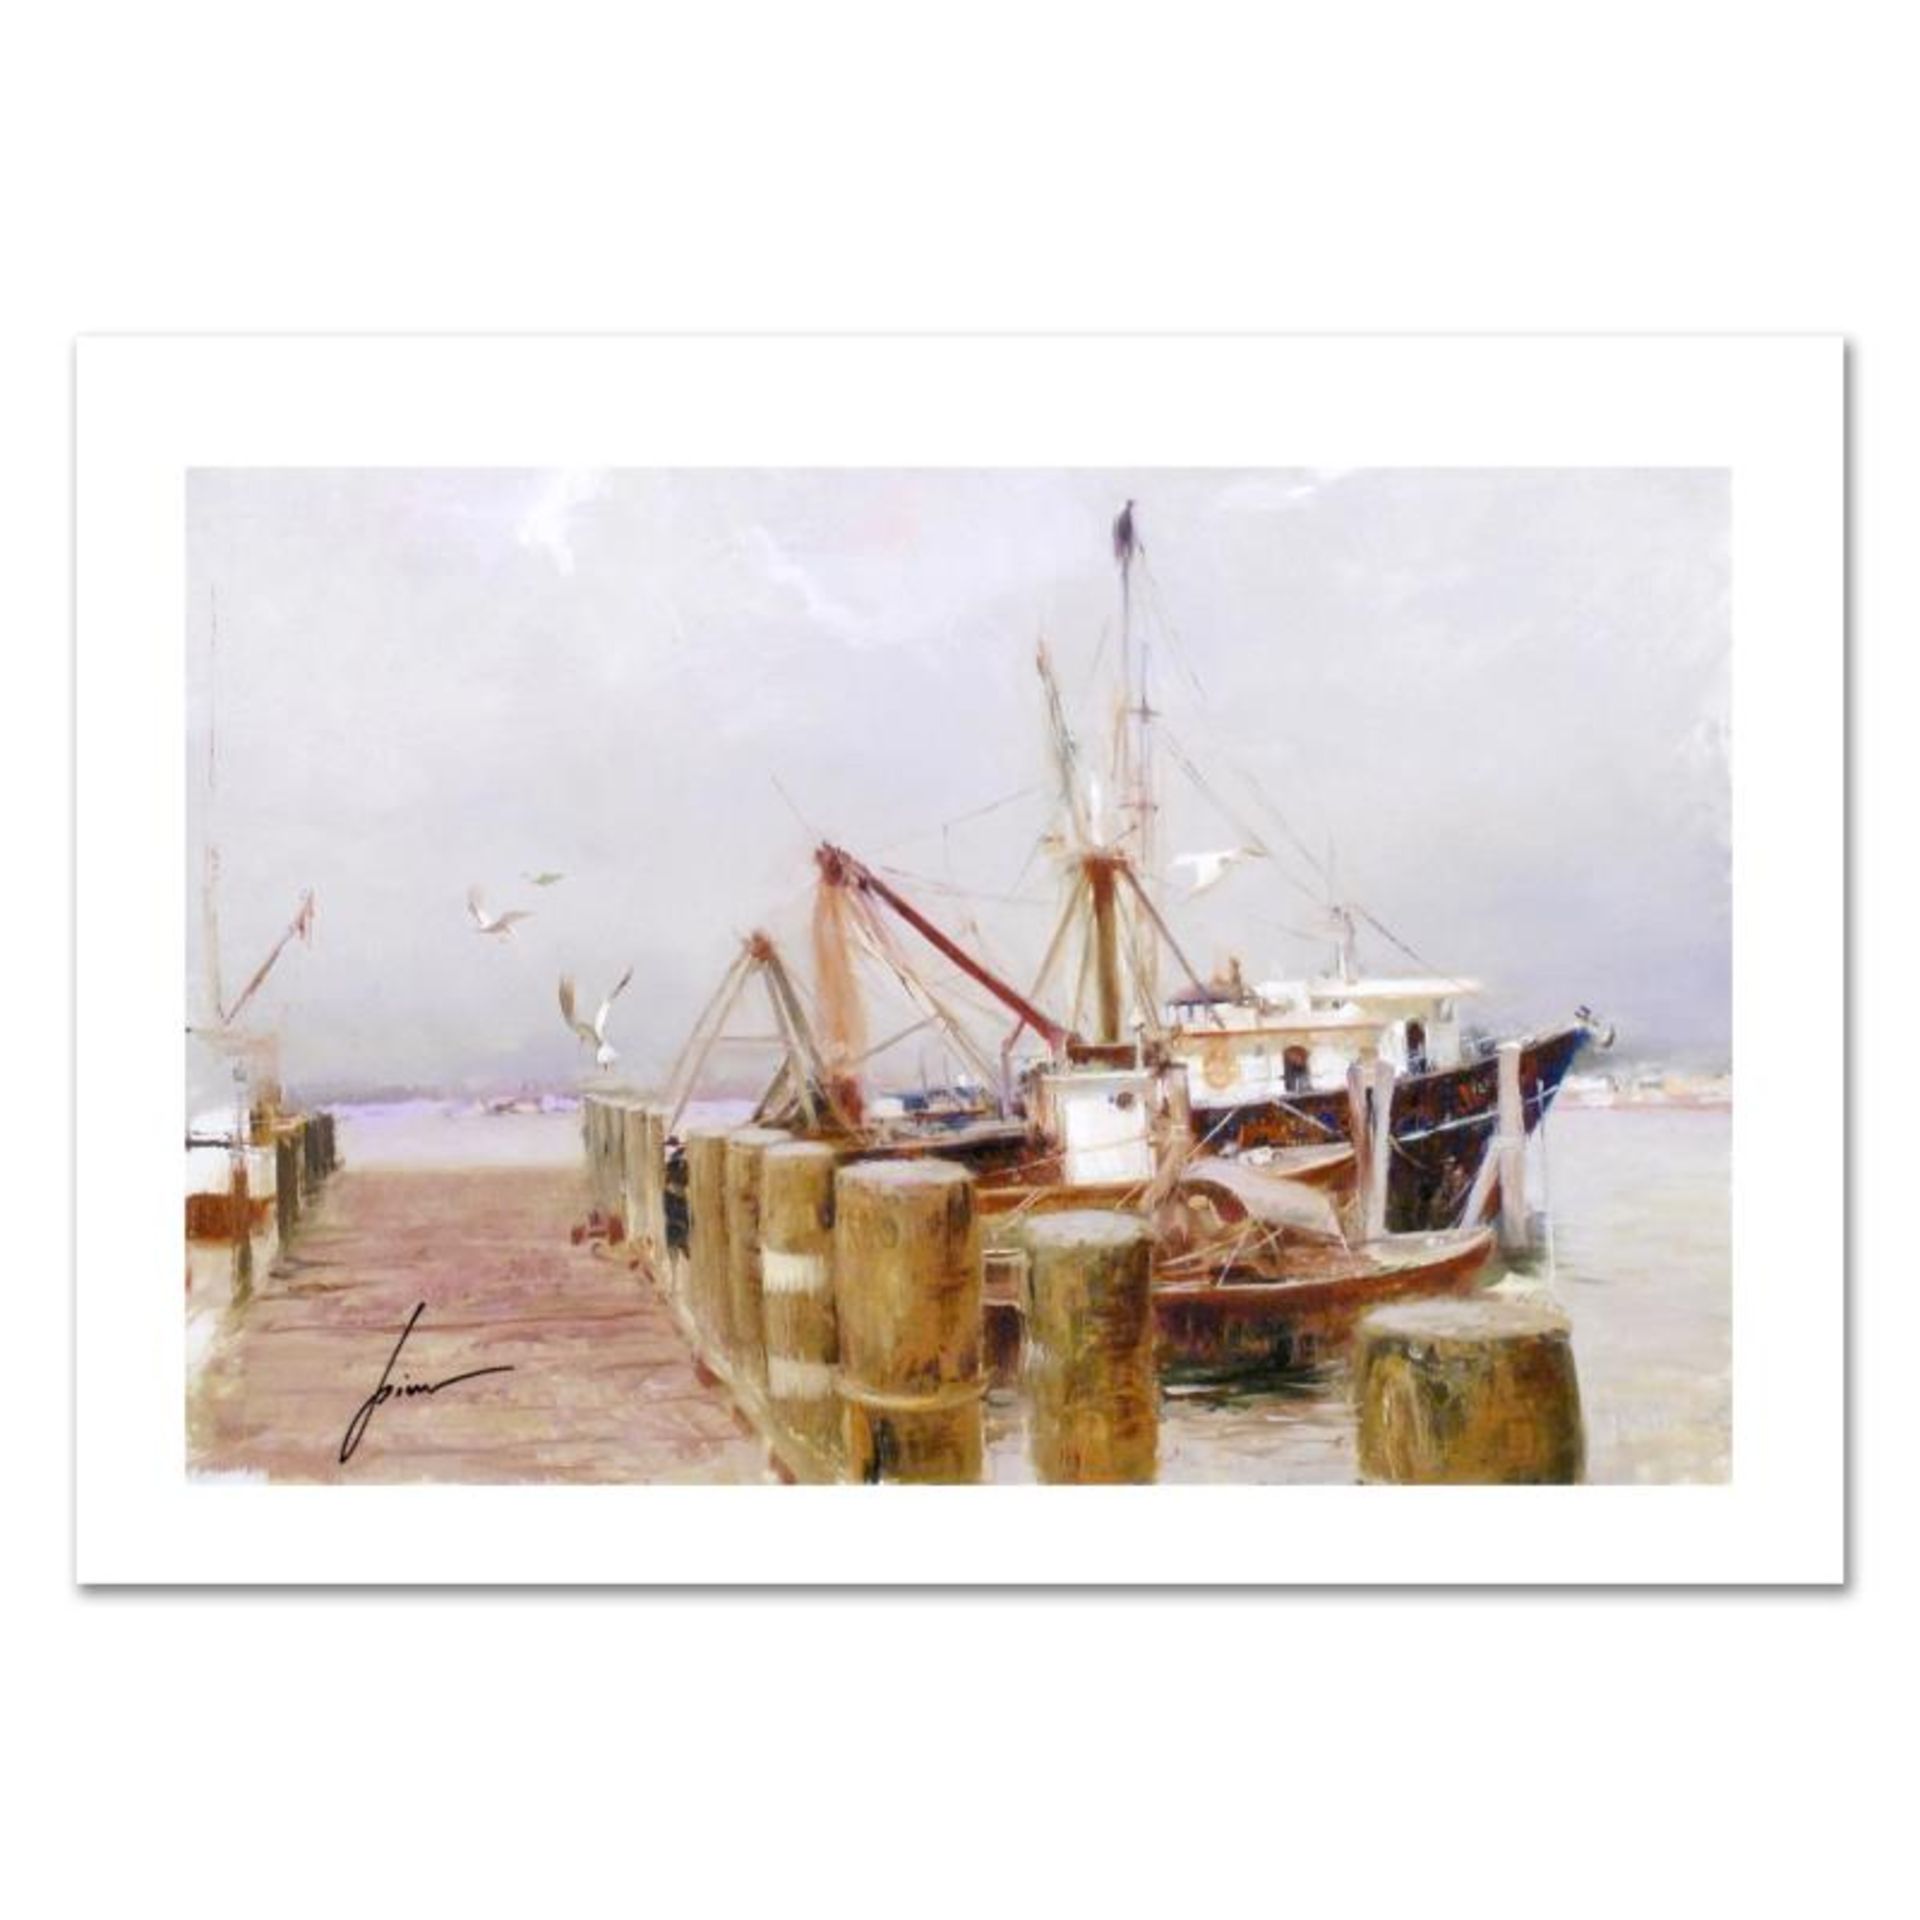 Pino (1939-2010) "Safe Harbor" Limited Edition Giclee. Numbered and Hand Signed;